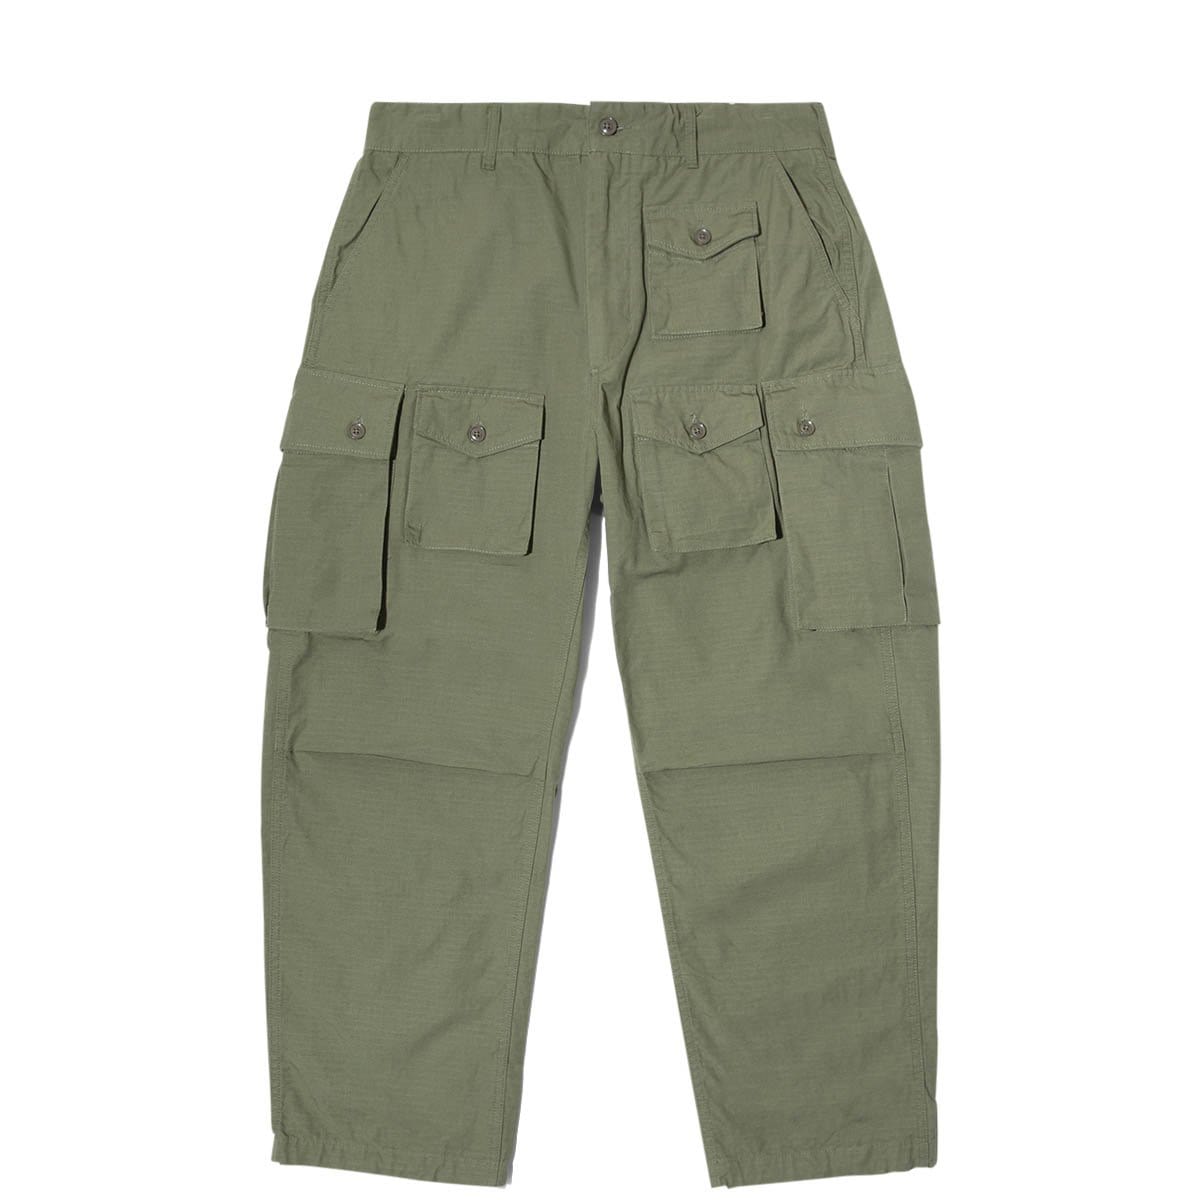 Engineered Garments FA Pant Olive Cotton Ripstop